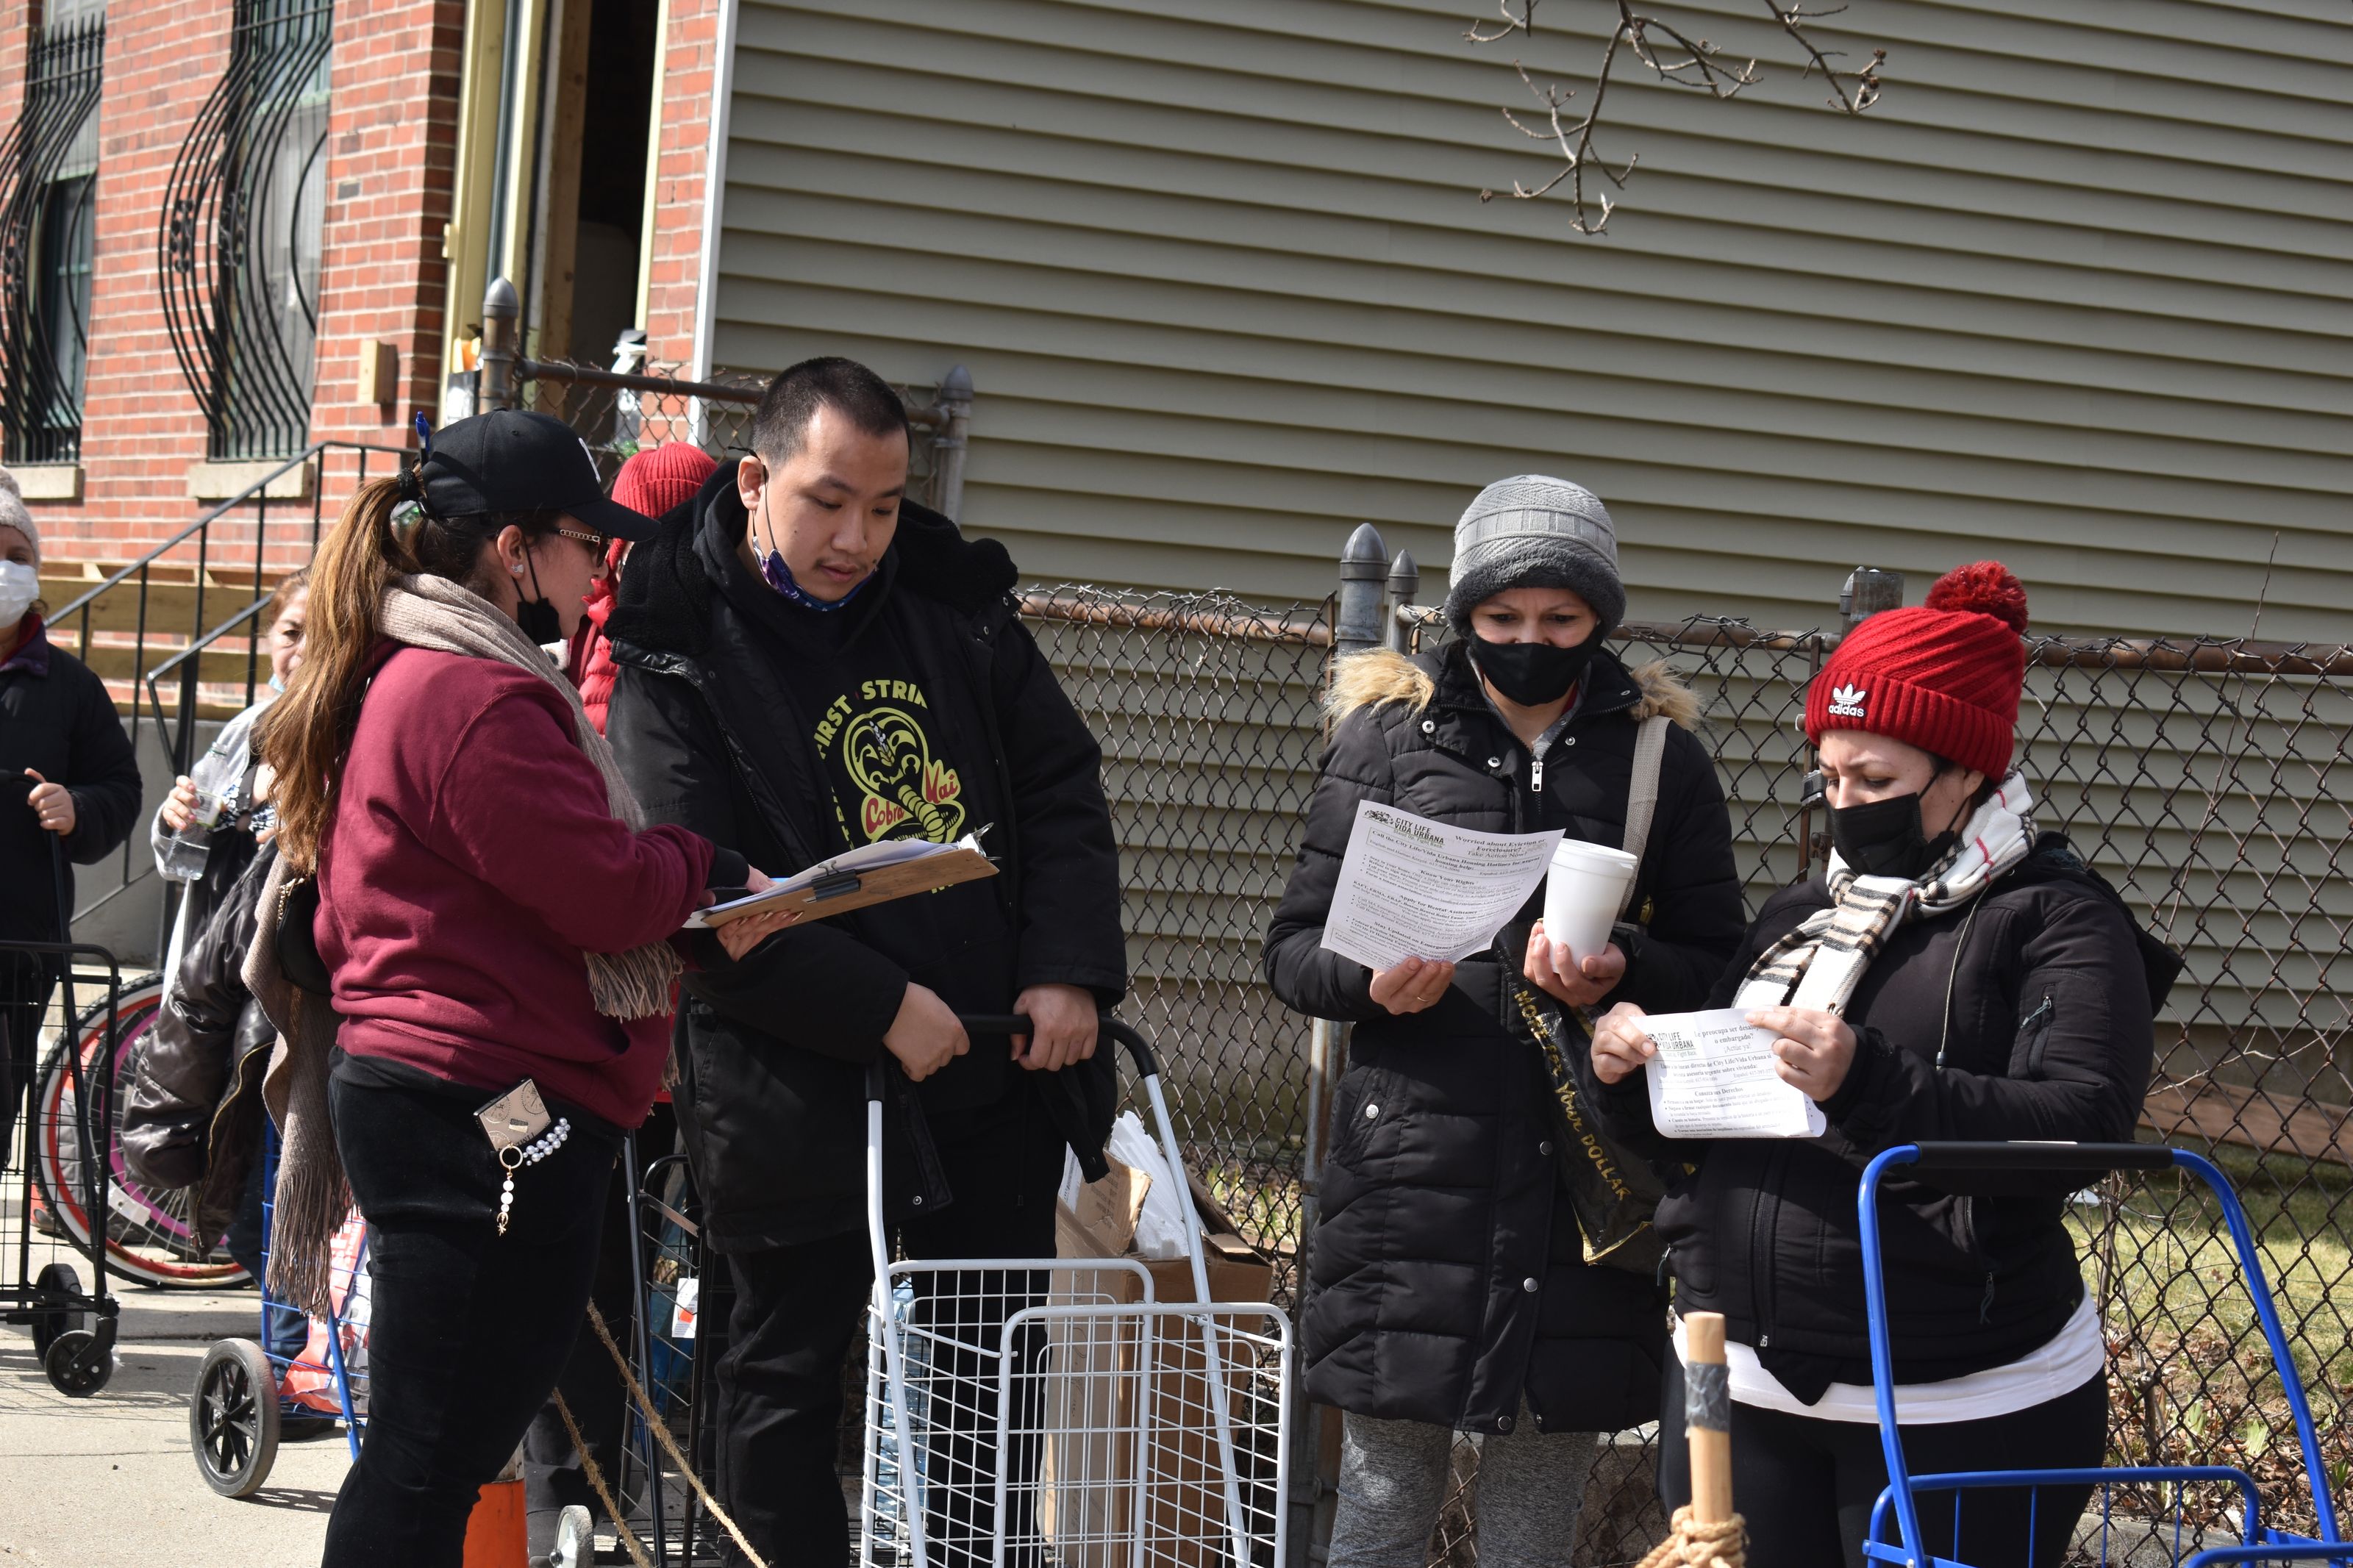 Representatives from Urbana Vida, which canvases for signatures to prevent the eviction of an apartment building scheduled for demolition, talk to clients in line at East Boston Community Soup Kitchen, March 15, 2022 (Photo credit: Brandon Hill).